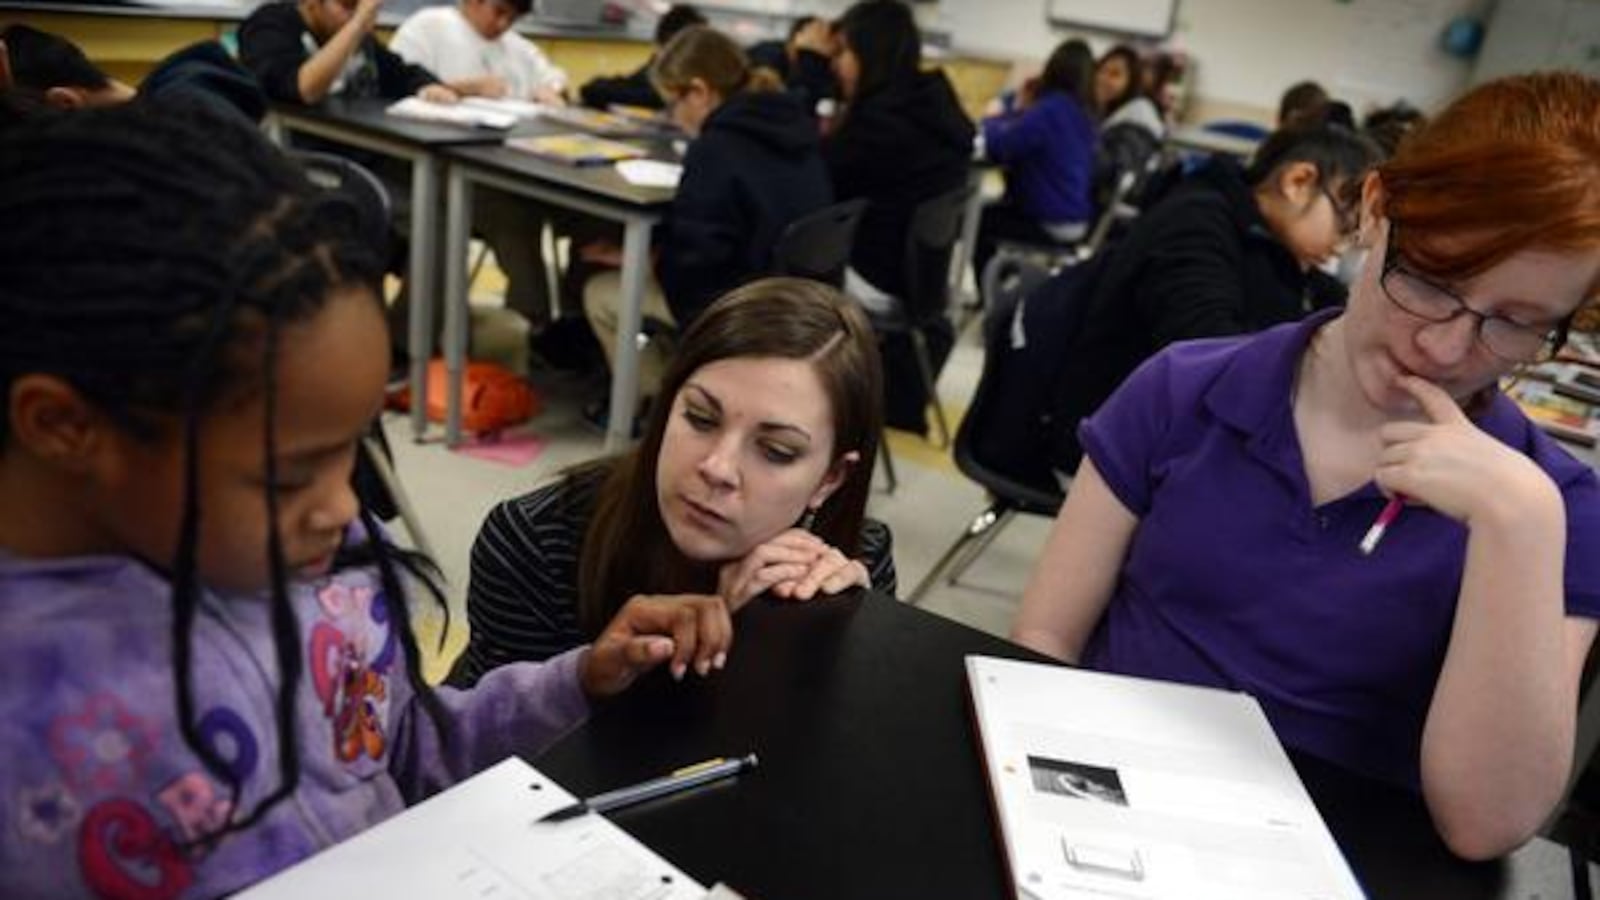 Sixth-grade science teacher Monica Wisniewski works with Pija Williams Terralee, left, and Myth Cubbison at Kearney Middle School in Commerce City. Kearney is in Adams County School District 14.